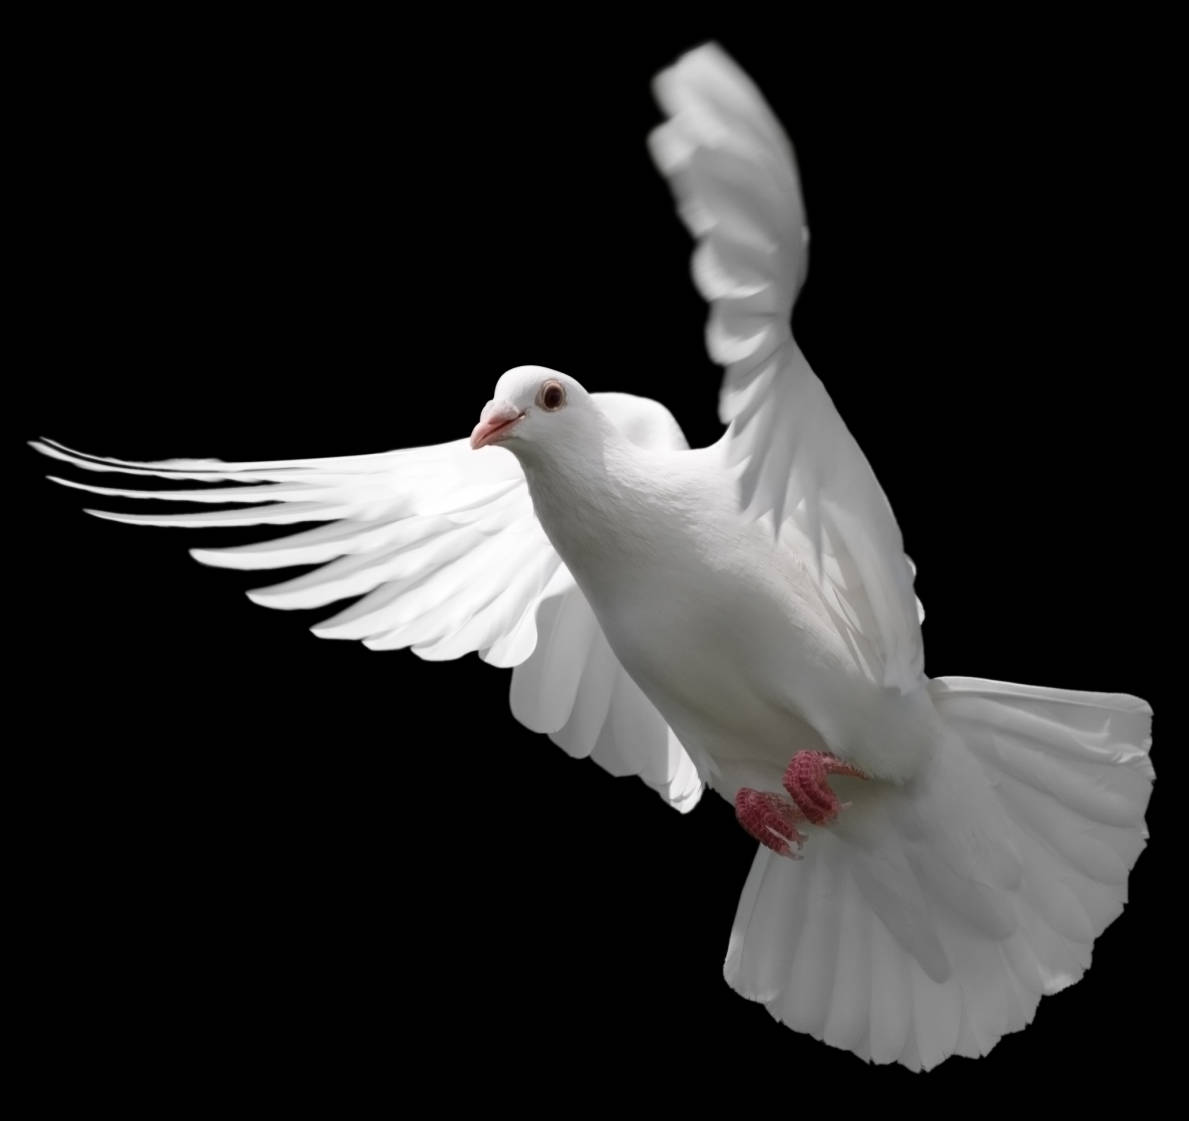 White Dove Flapping Its Wings Wallpaper